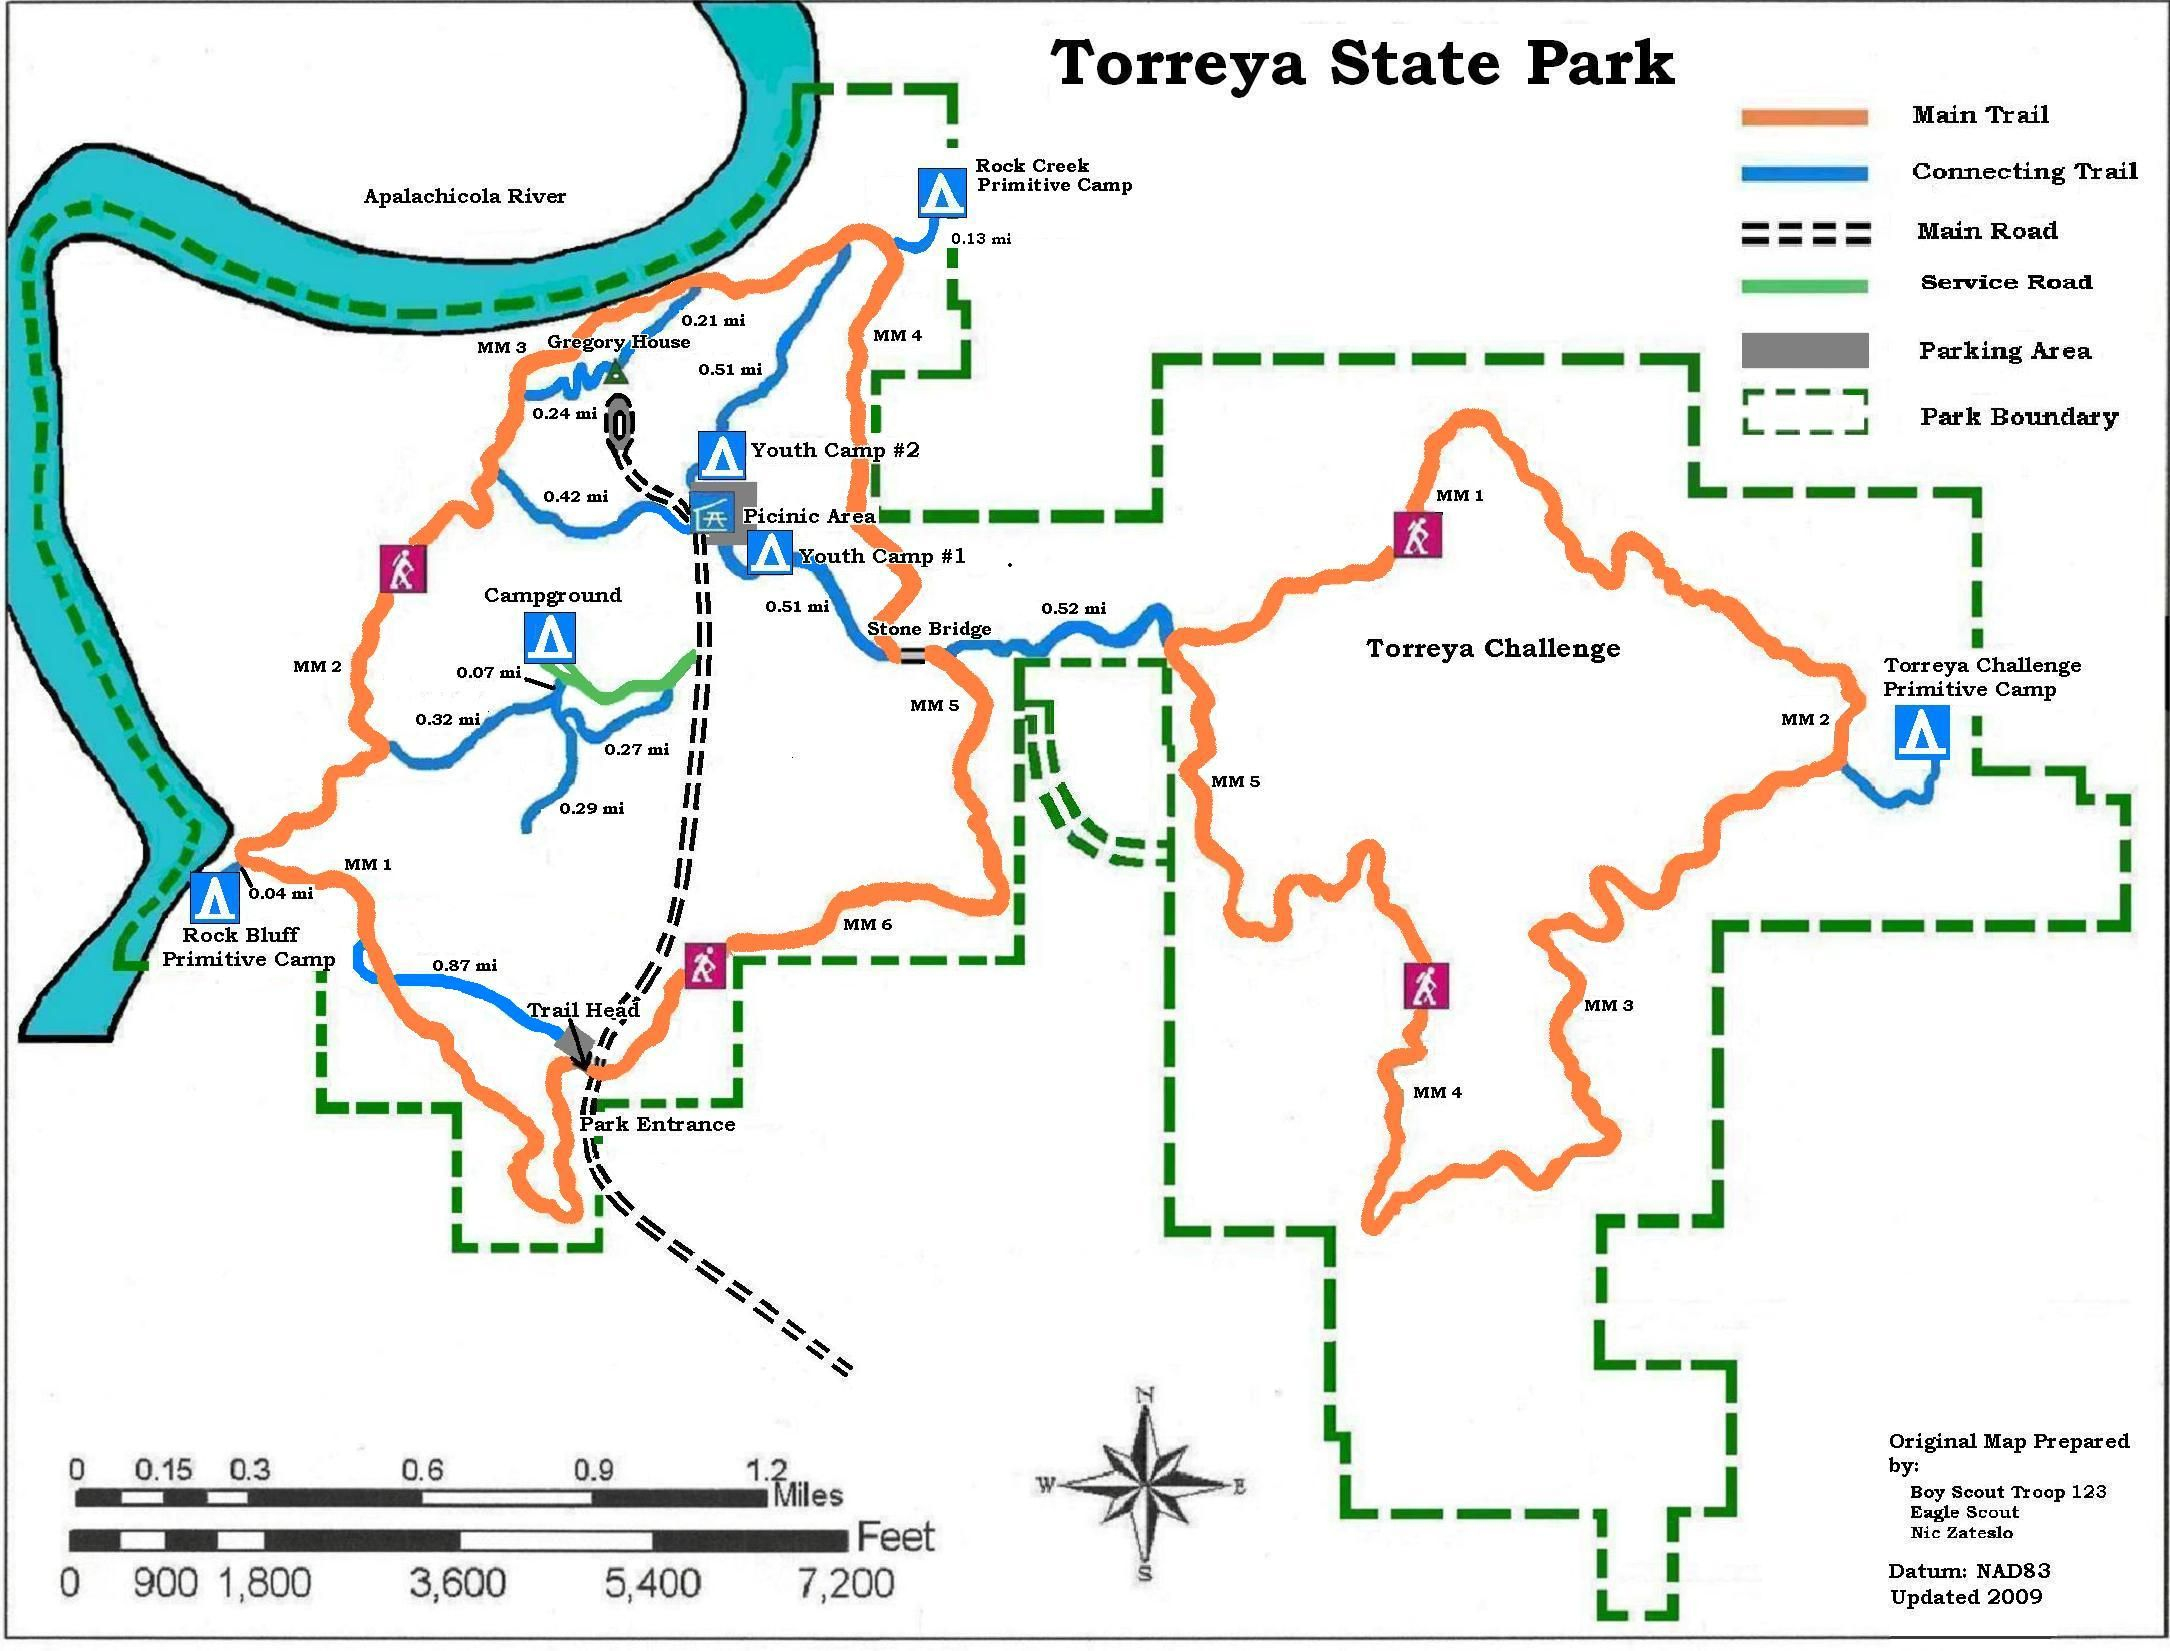 Apalachicola National Forest Campgrounds | Map Of Torreya State Park - Florida State Campgrounds Map